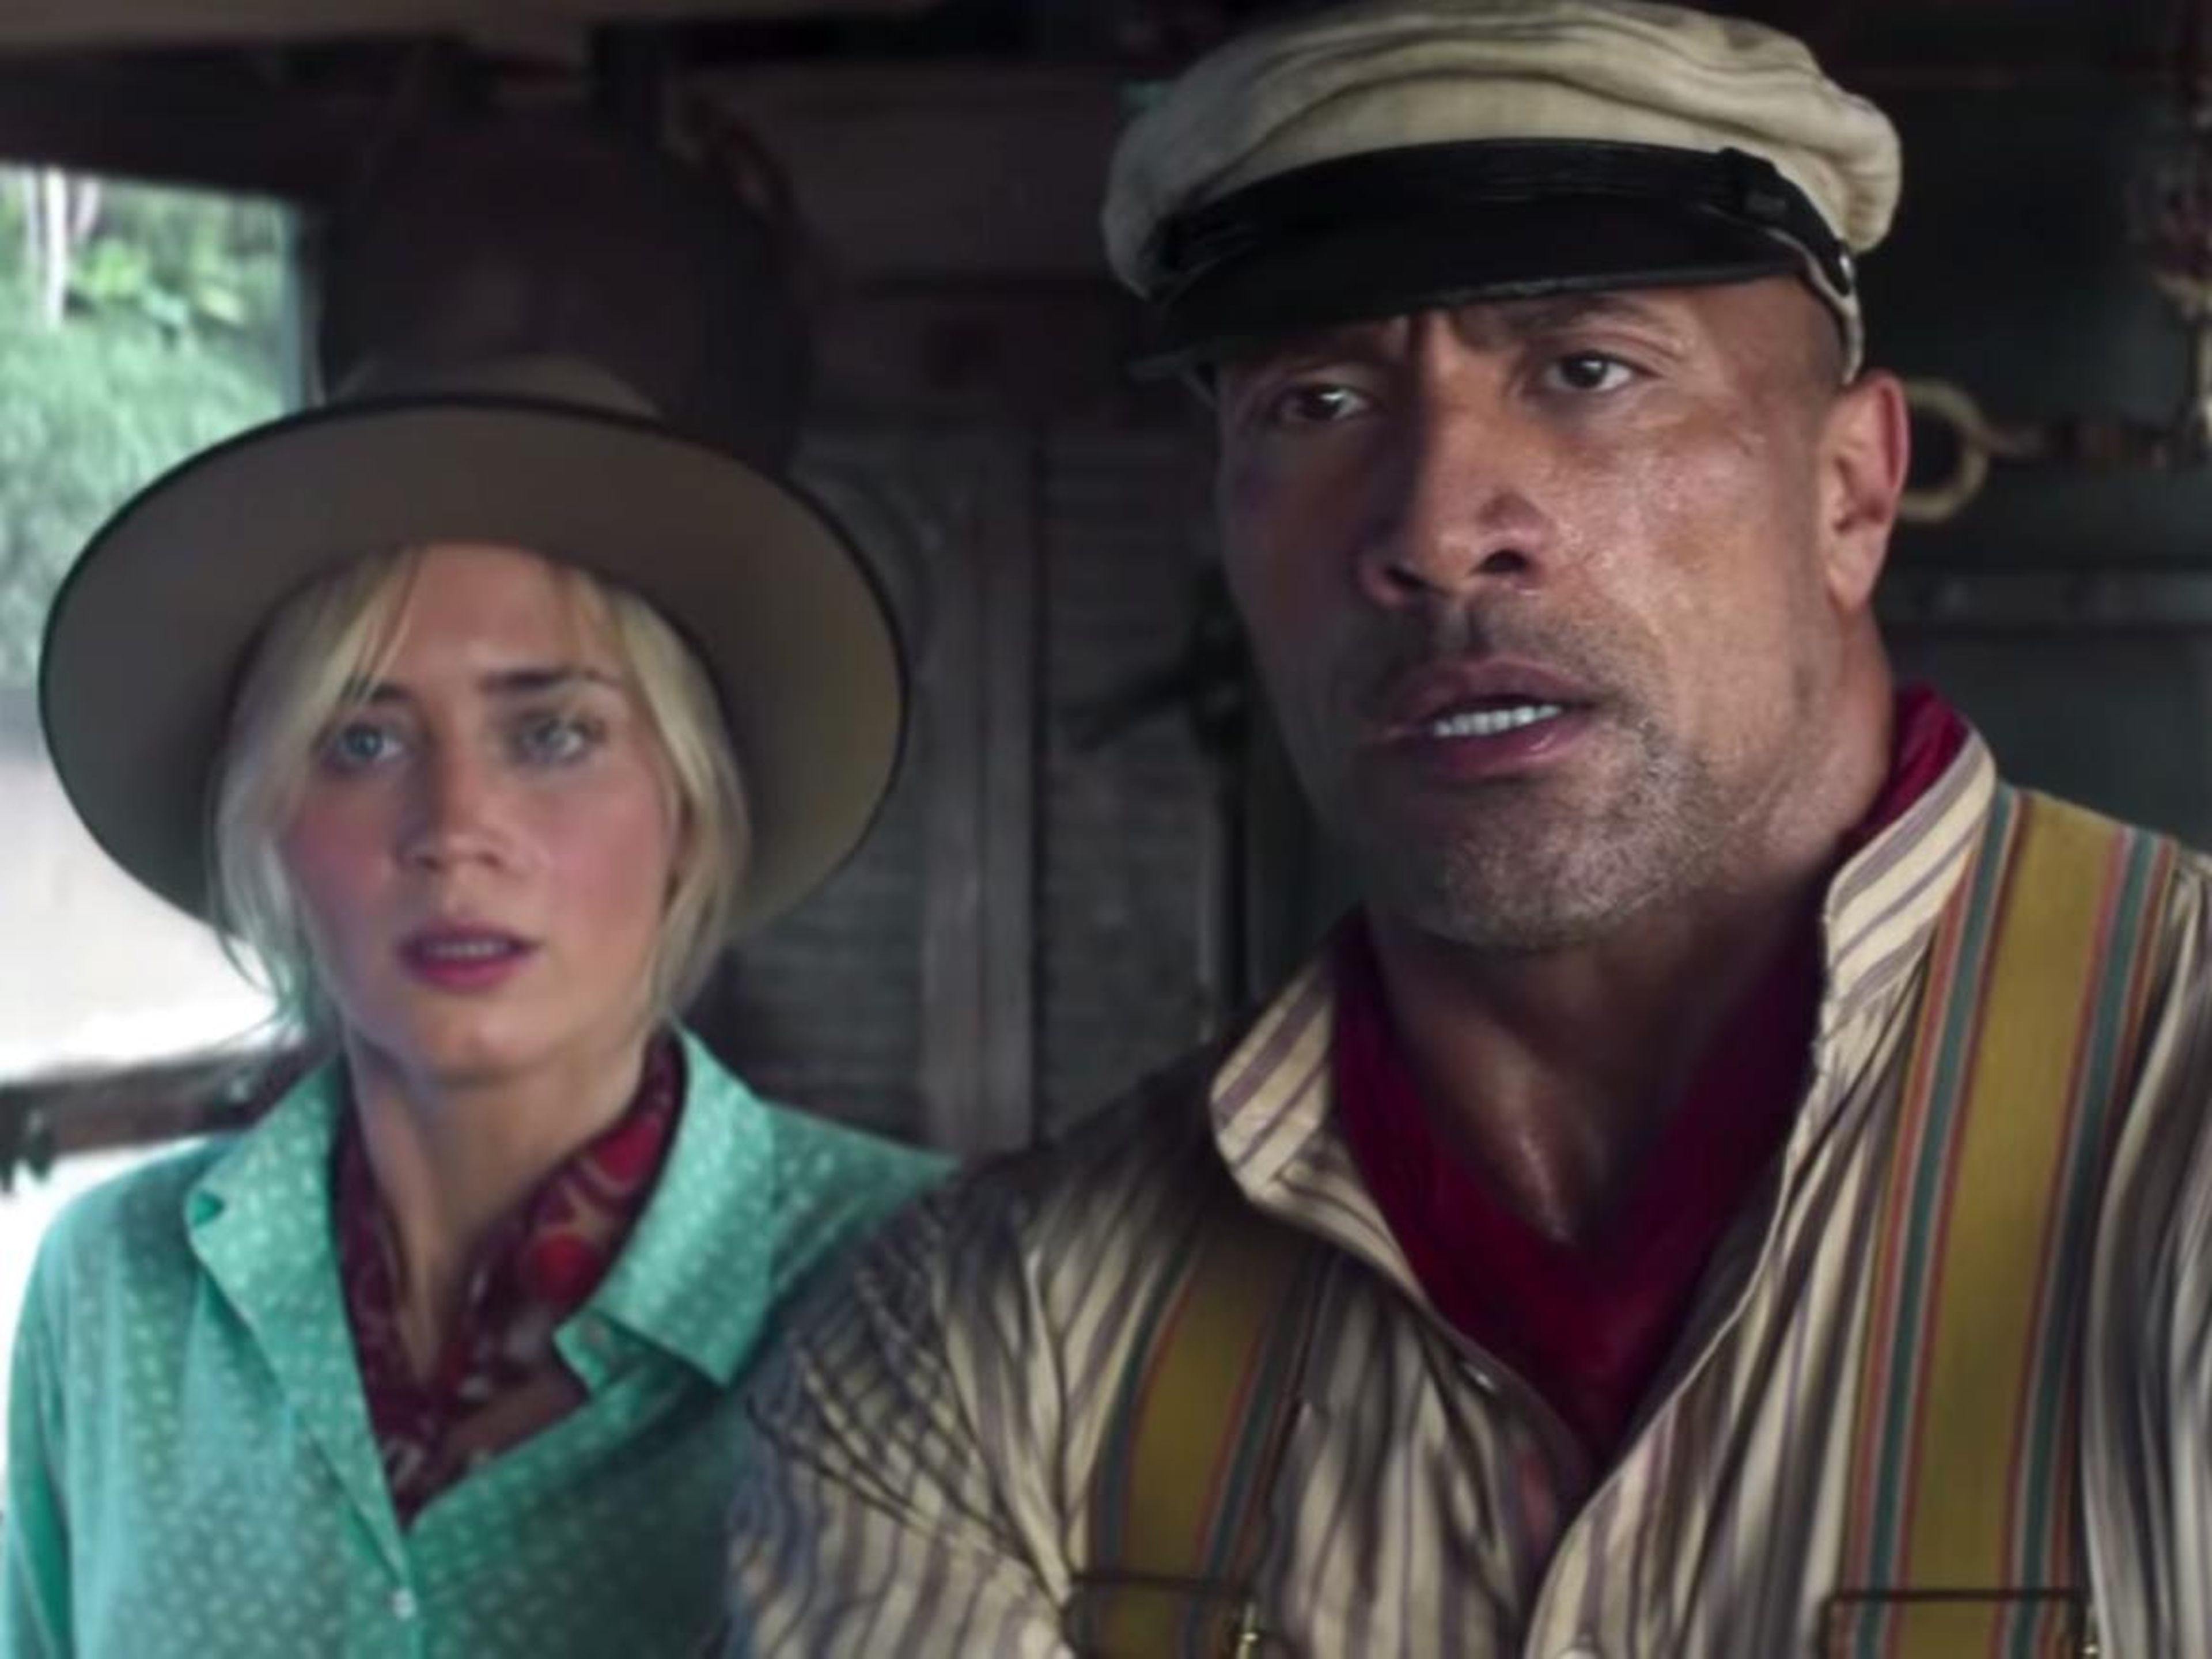 Emily Blunt and Dwayne "The Rock" Johnson star in "Jungle Cruise."